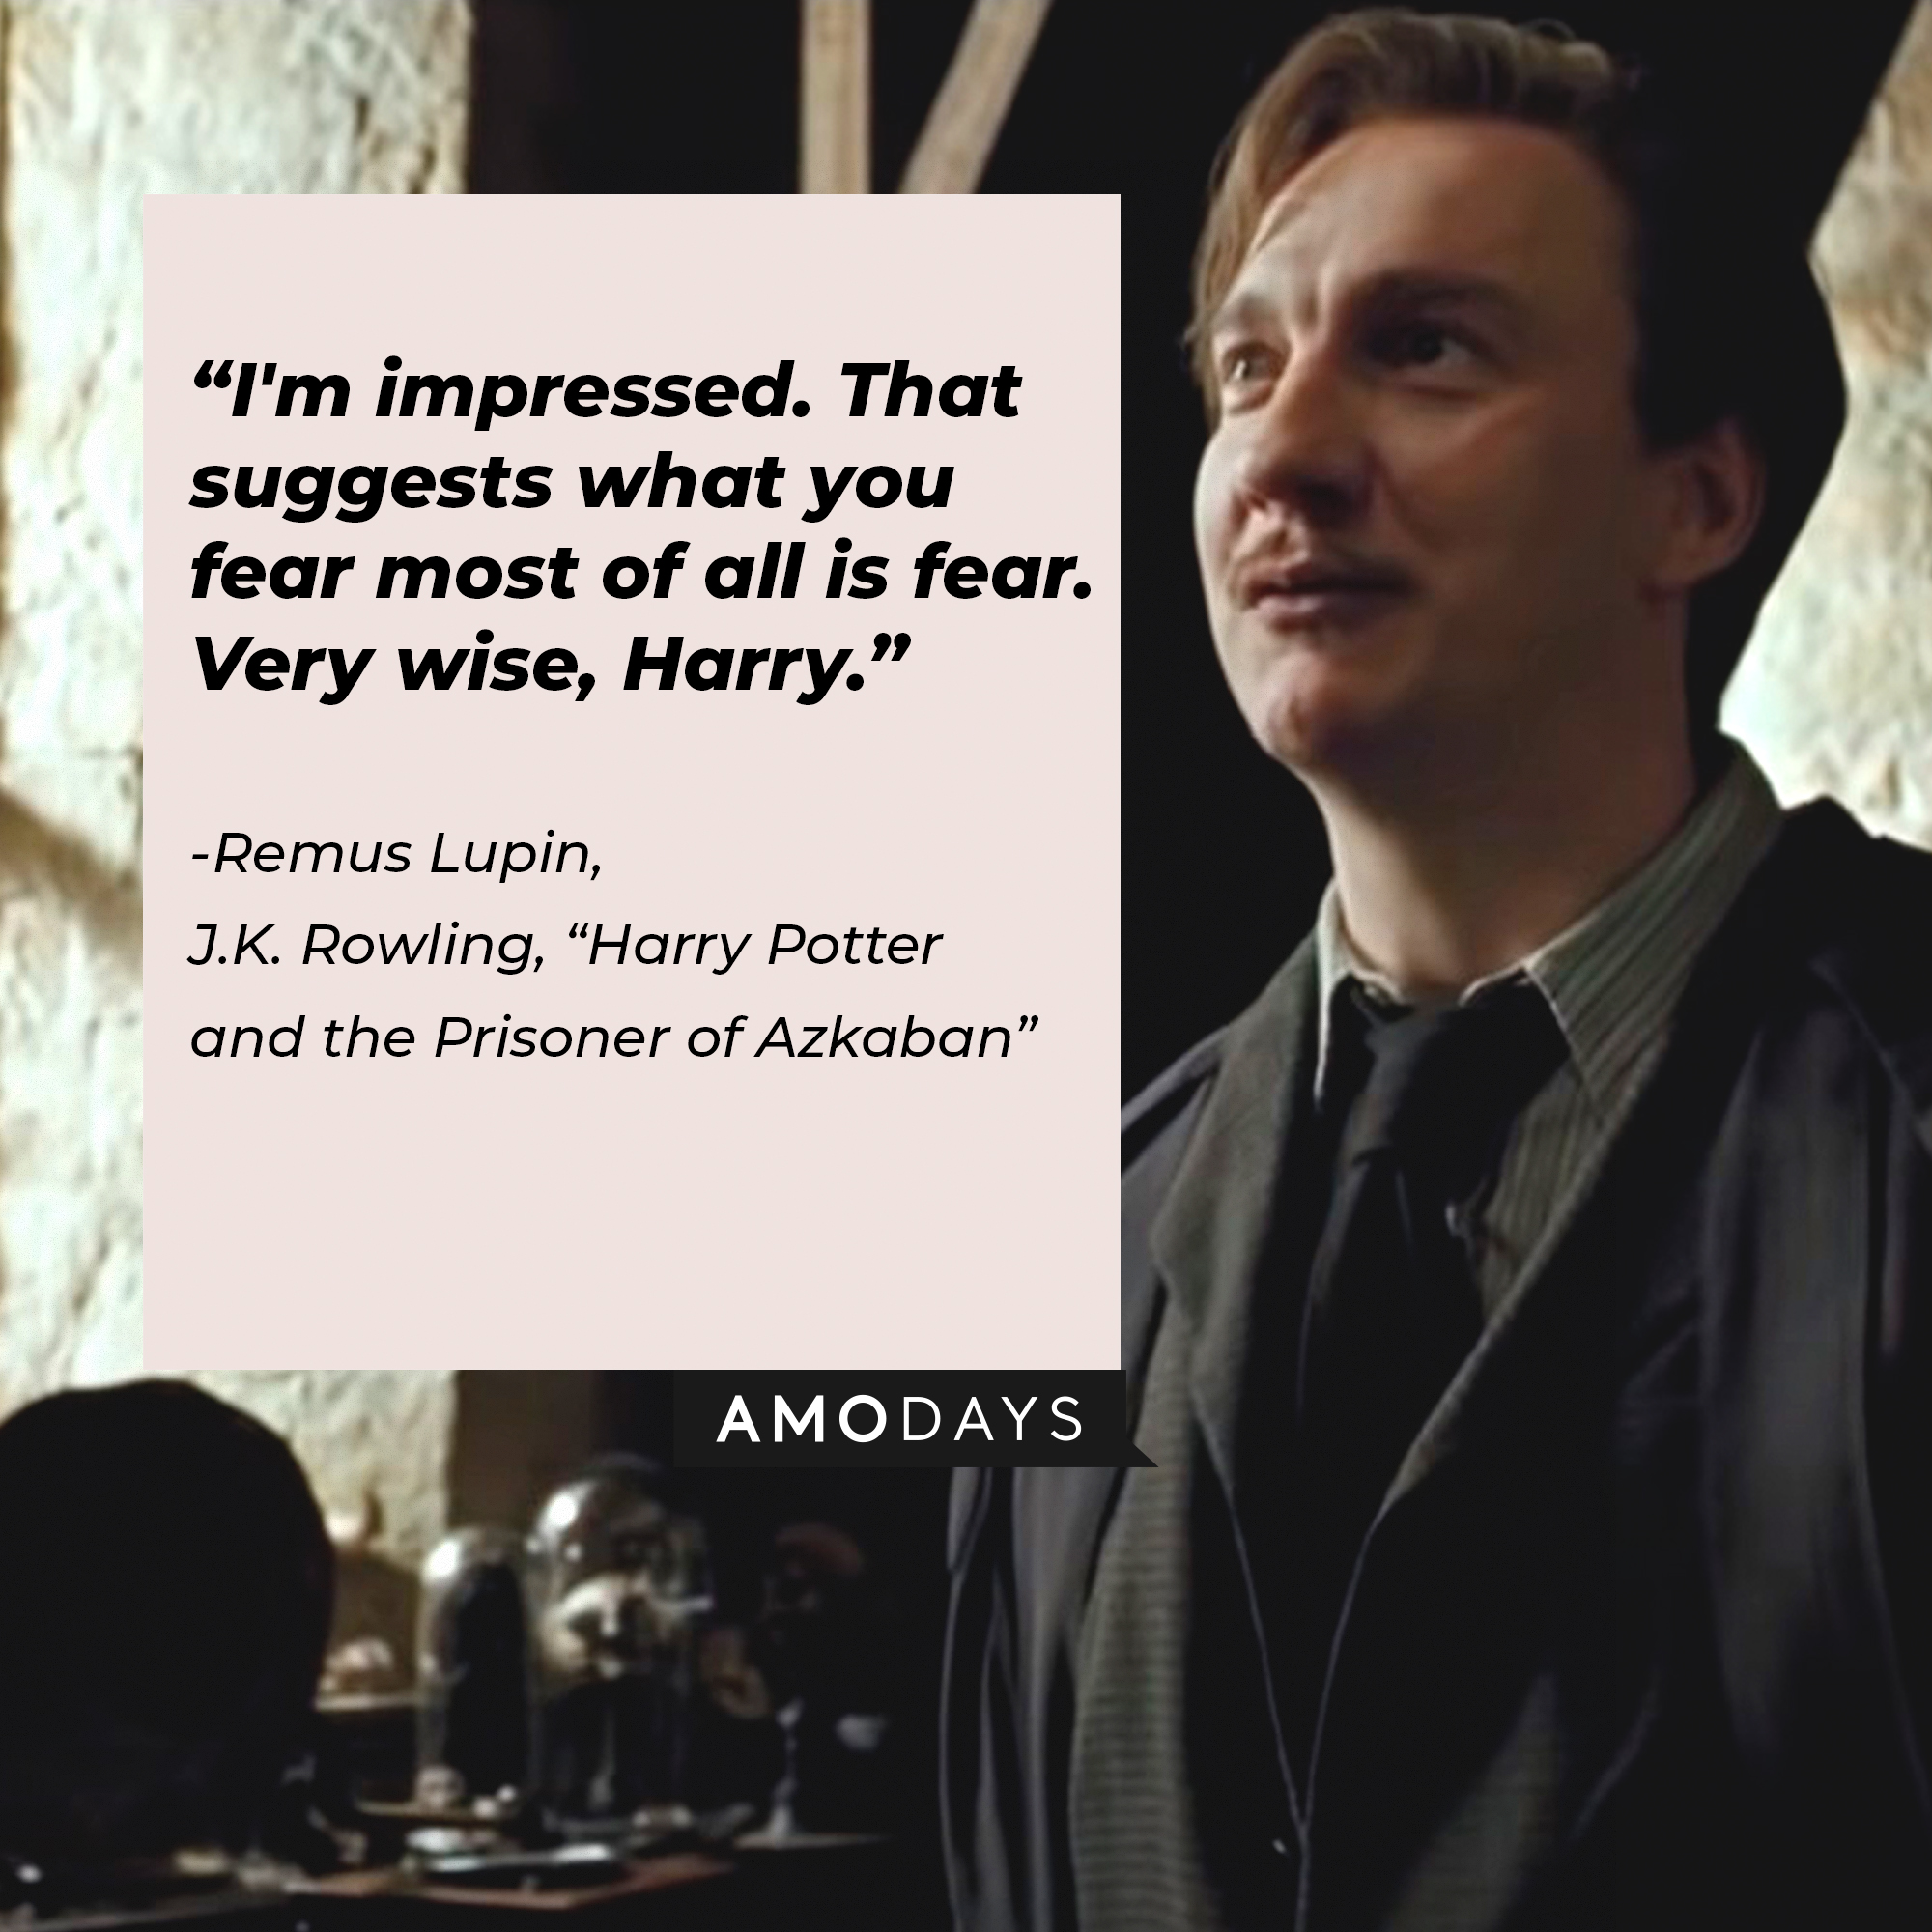 A picture of Remus Lupin with his quote: “I'm impressed. That suggests what you fear most of all is fear. Very wise, Harry.” | Source: youtube.com/WarnerBrosPictures